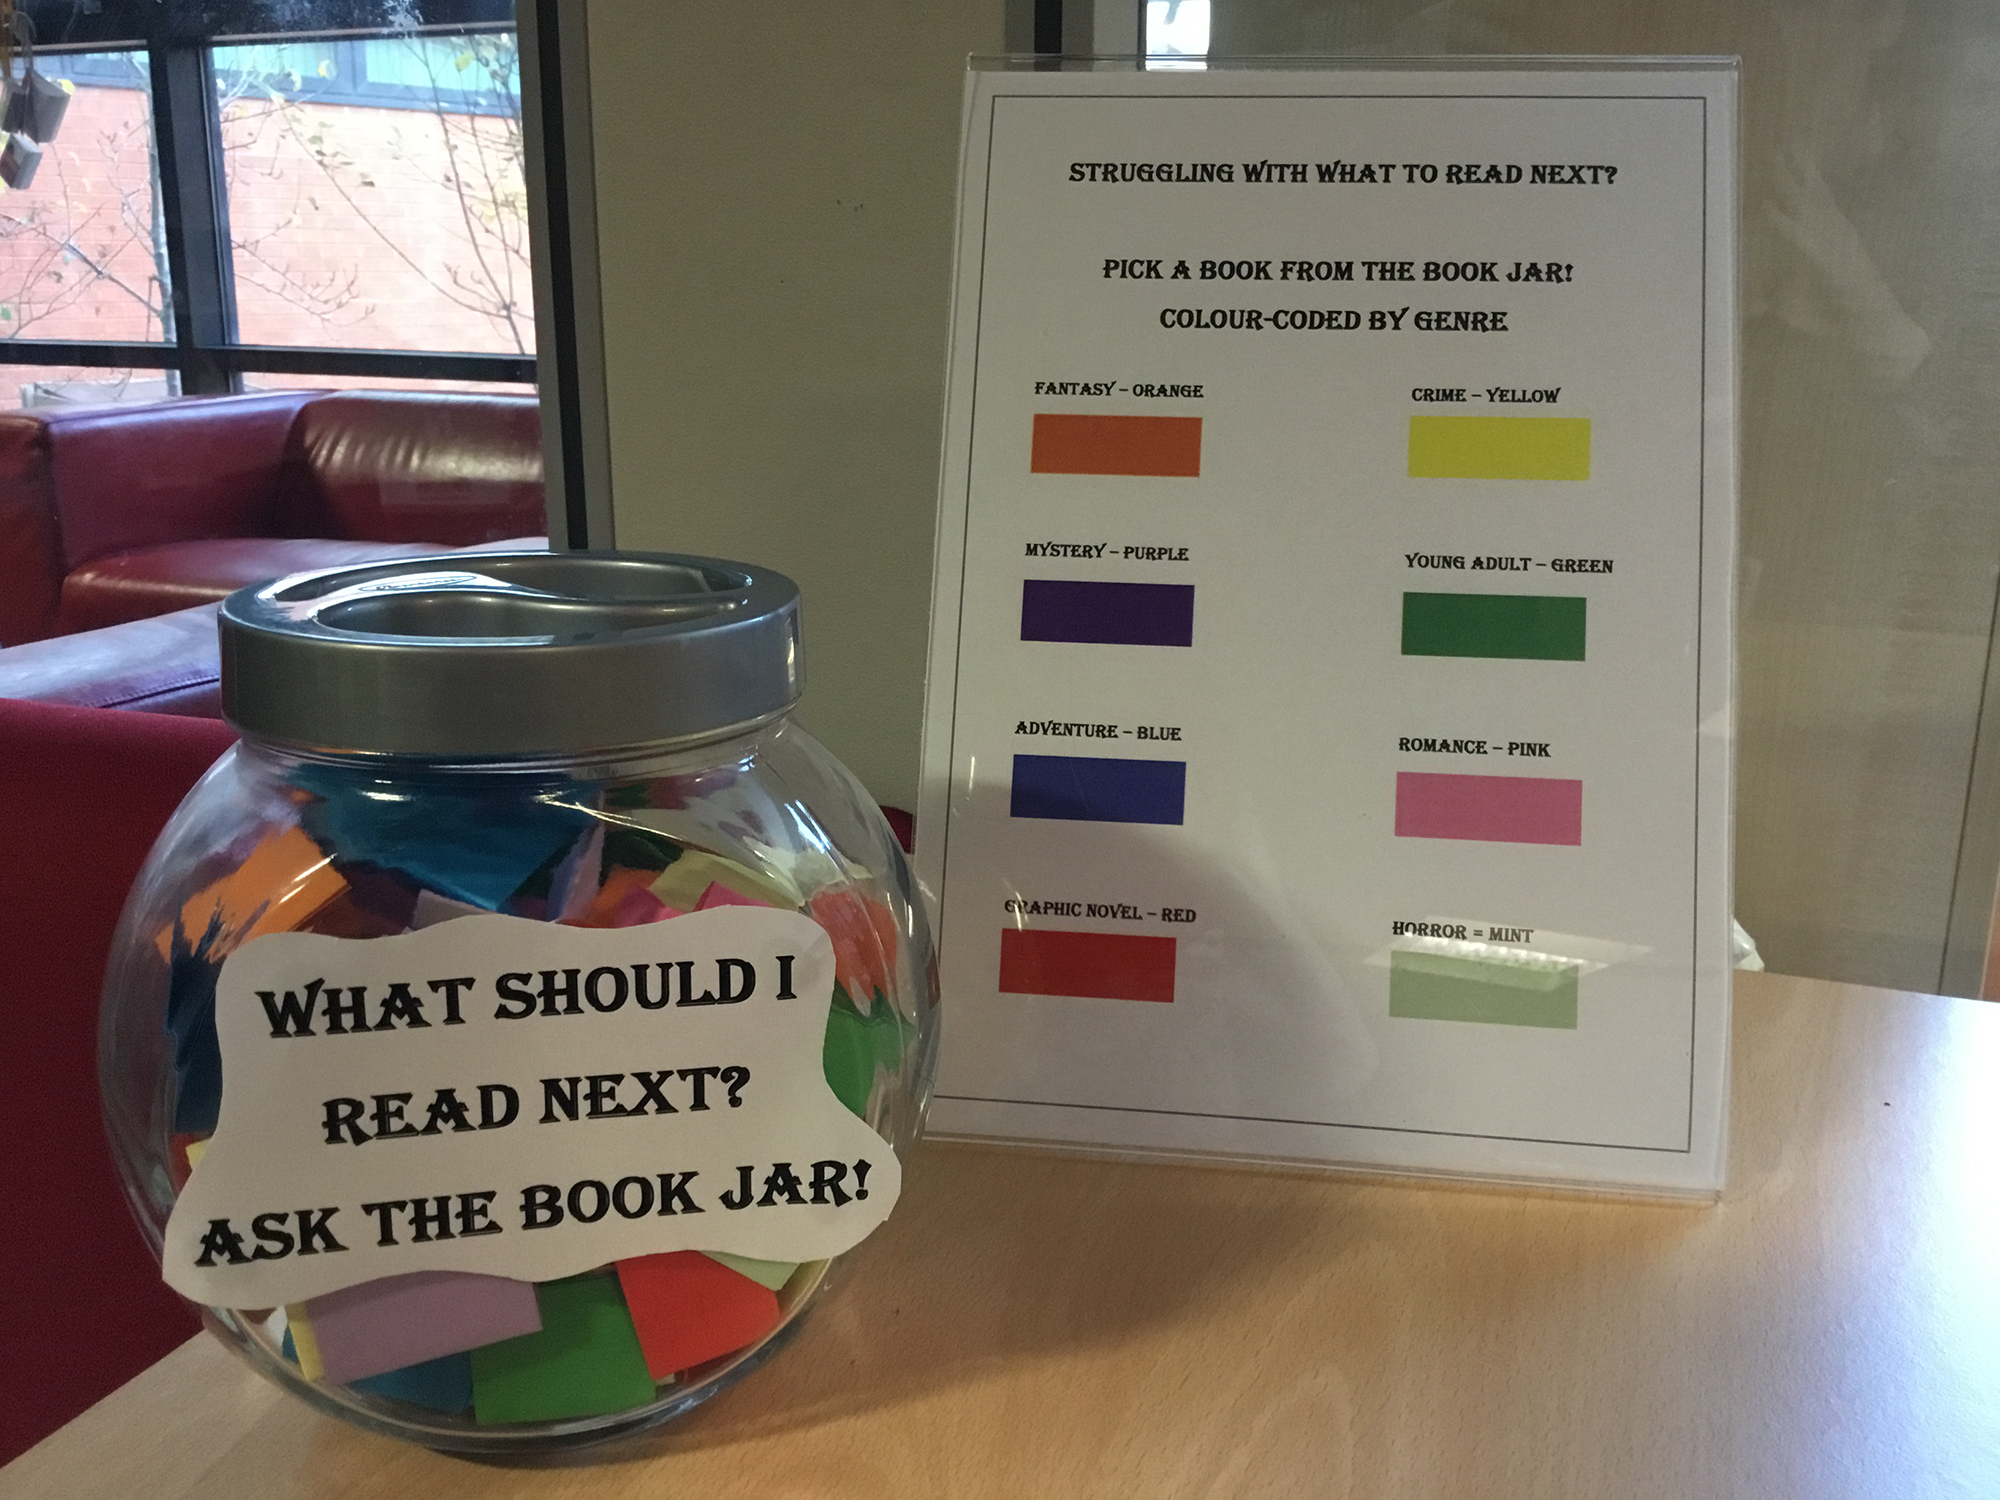 What Should I Read Next Book Jar on table with legend of what each colour means